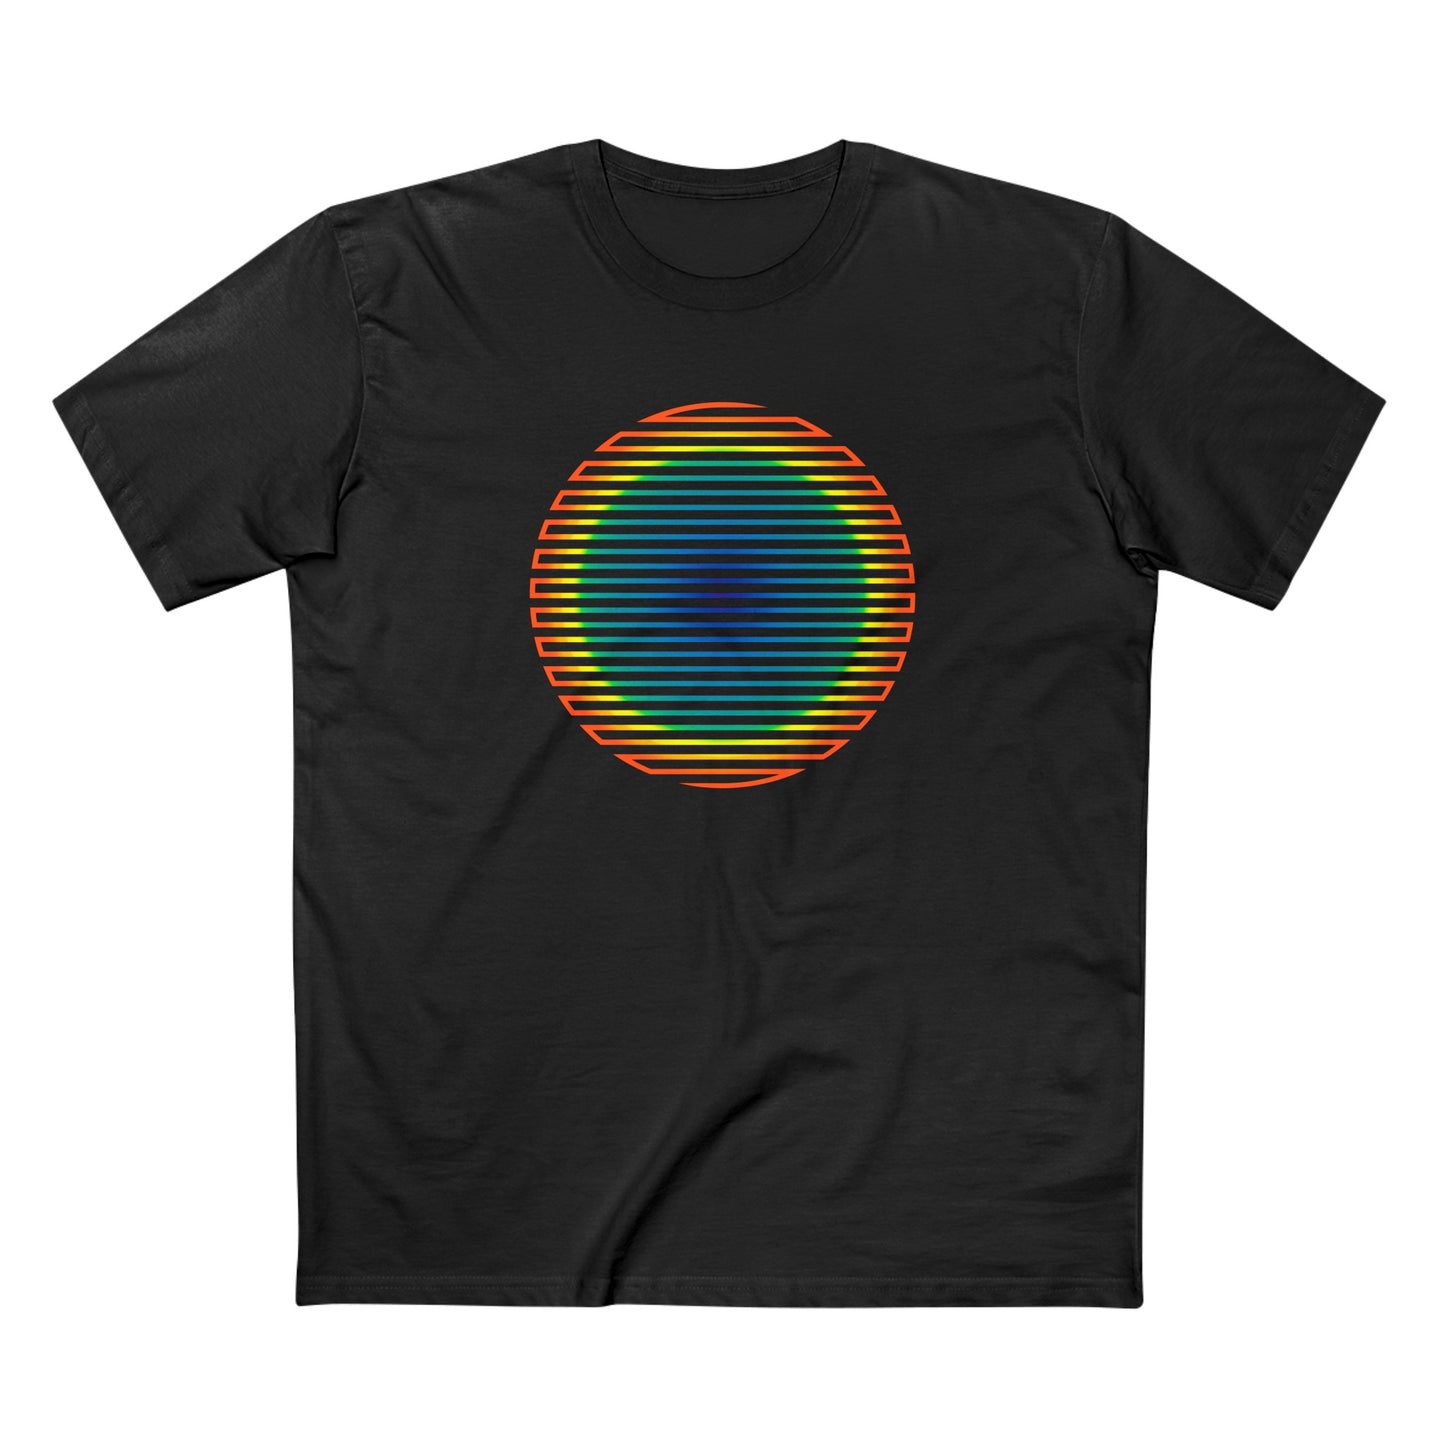 Yellowstone National Park T-Shirt - Grand Prismatic Spring Limited Edition